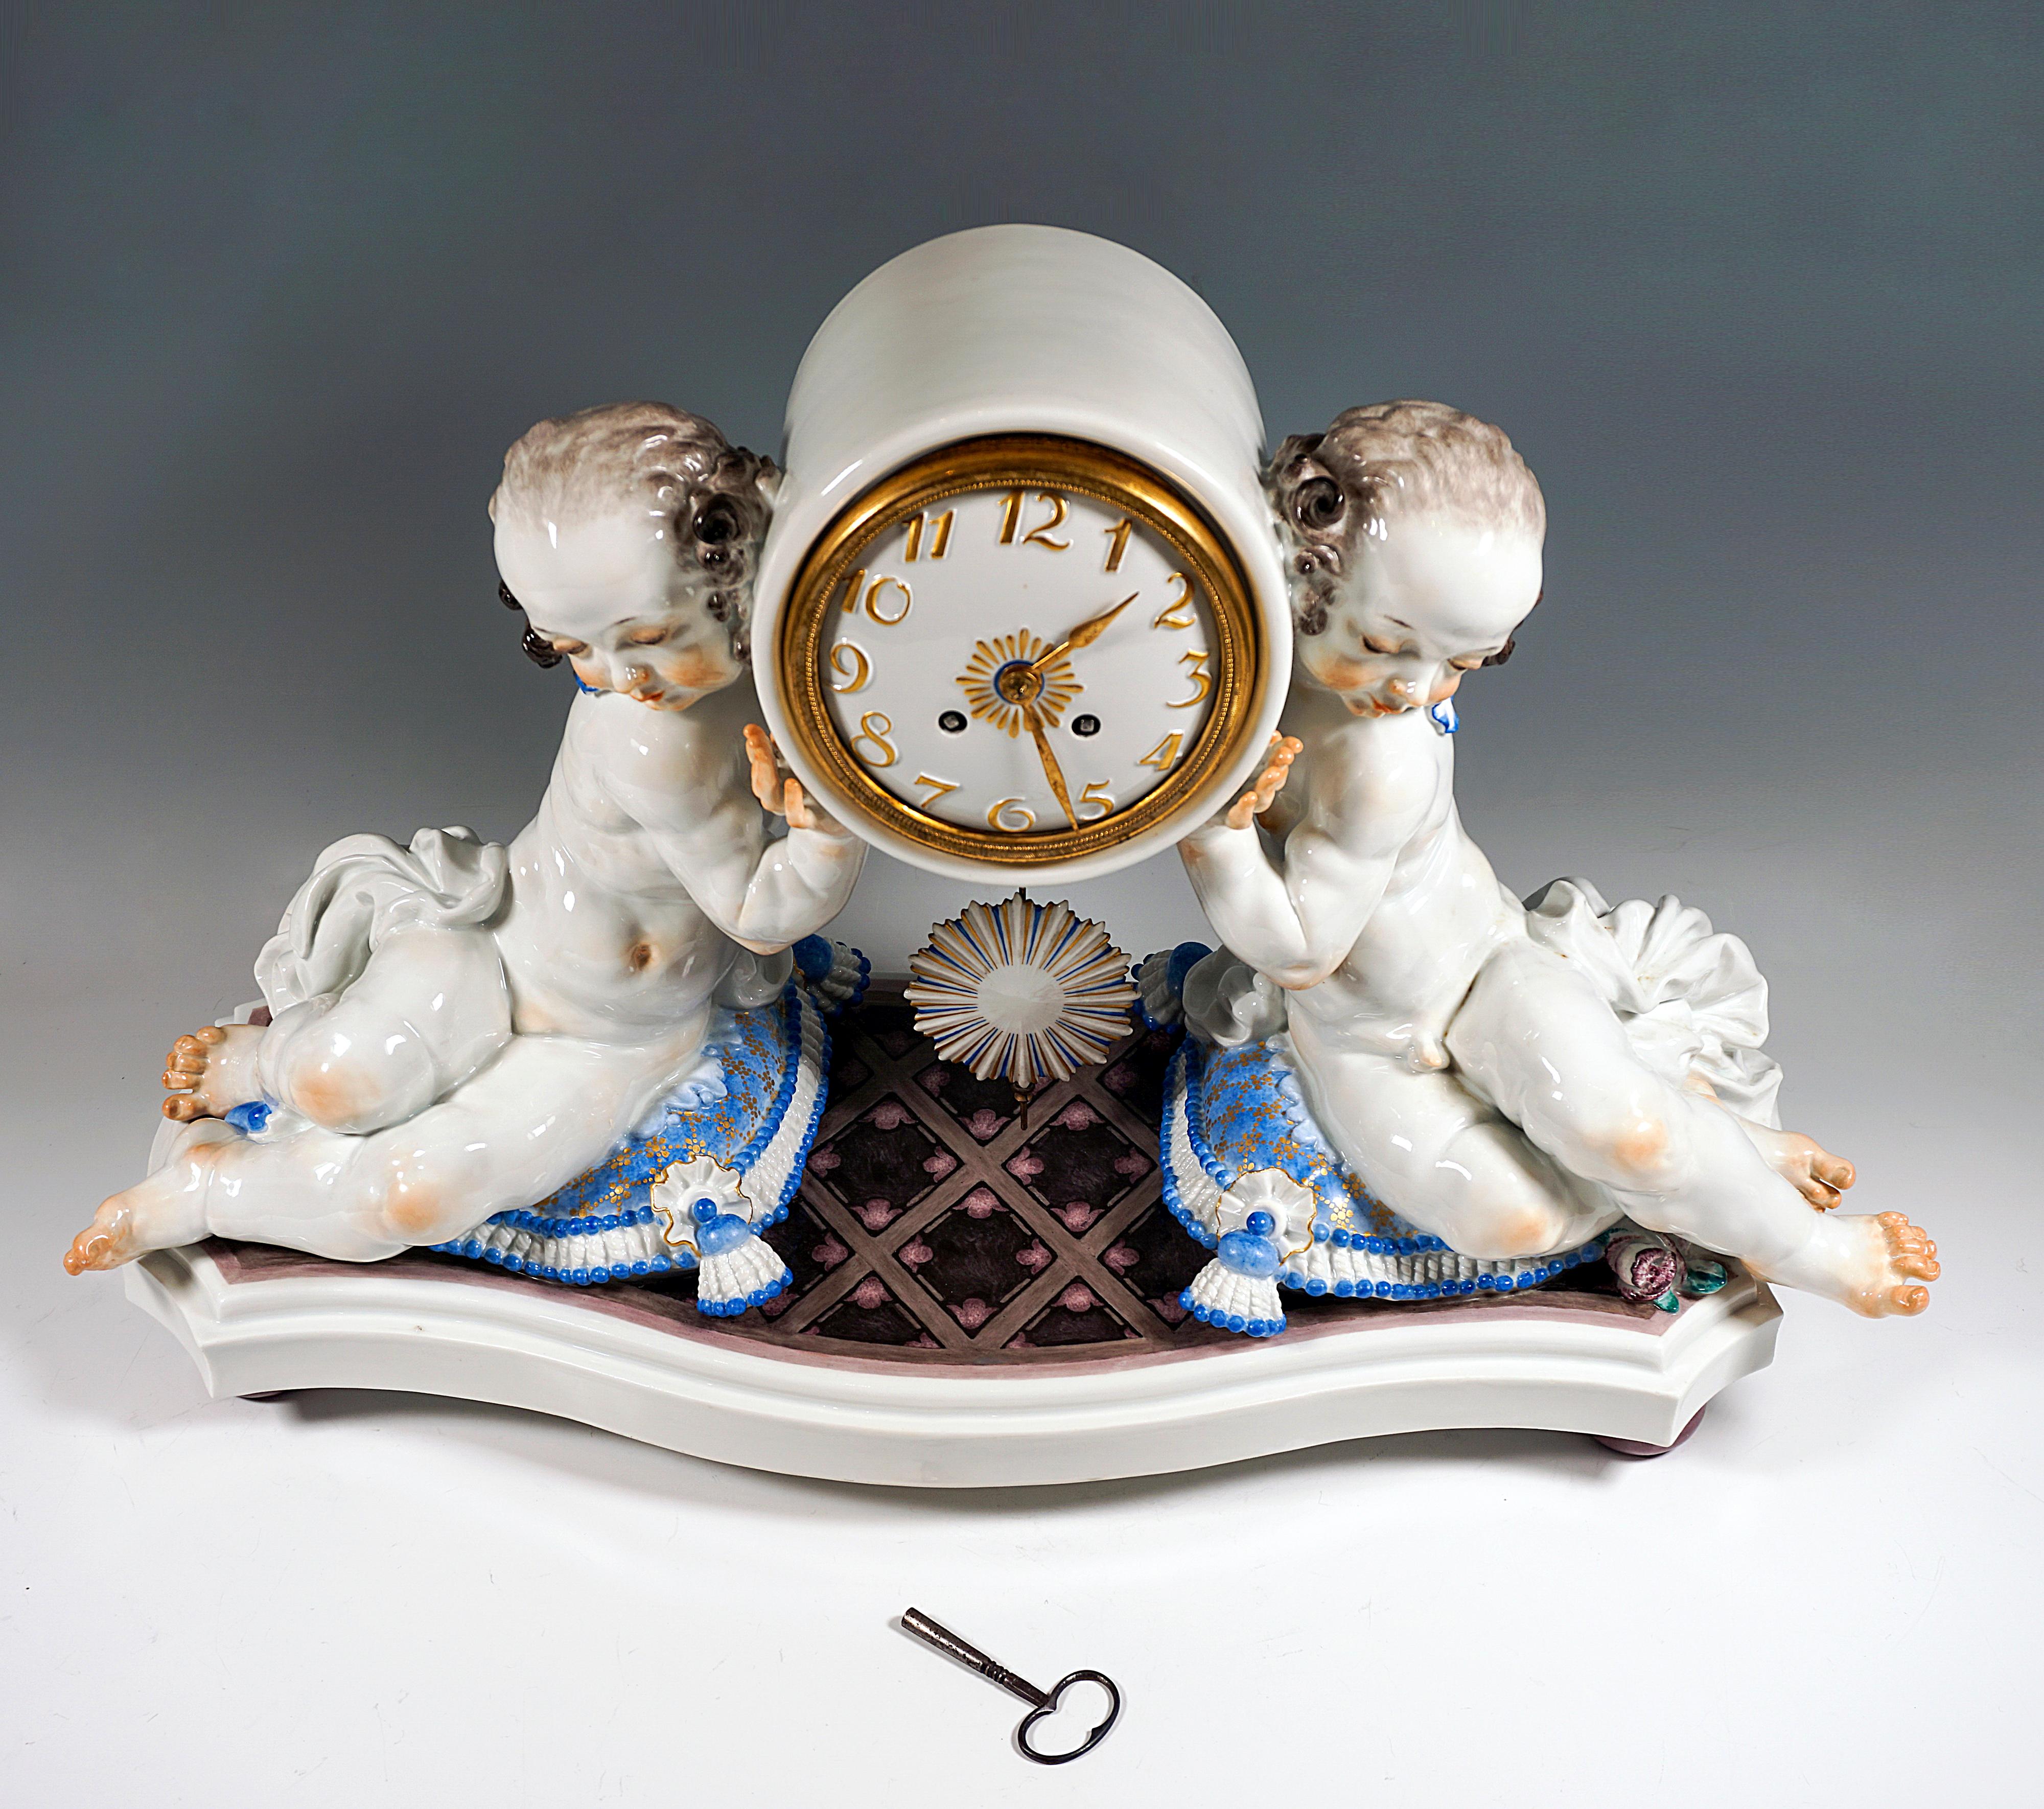 Excellent Meissen Rococo Style Piece of Art:
On a curved base plate with diamond pattern in marble look, sculptured cushions with tassel decoration, on the side seated figures, girl and boy, who gracefully carry the round clock case. White porcelain